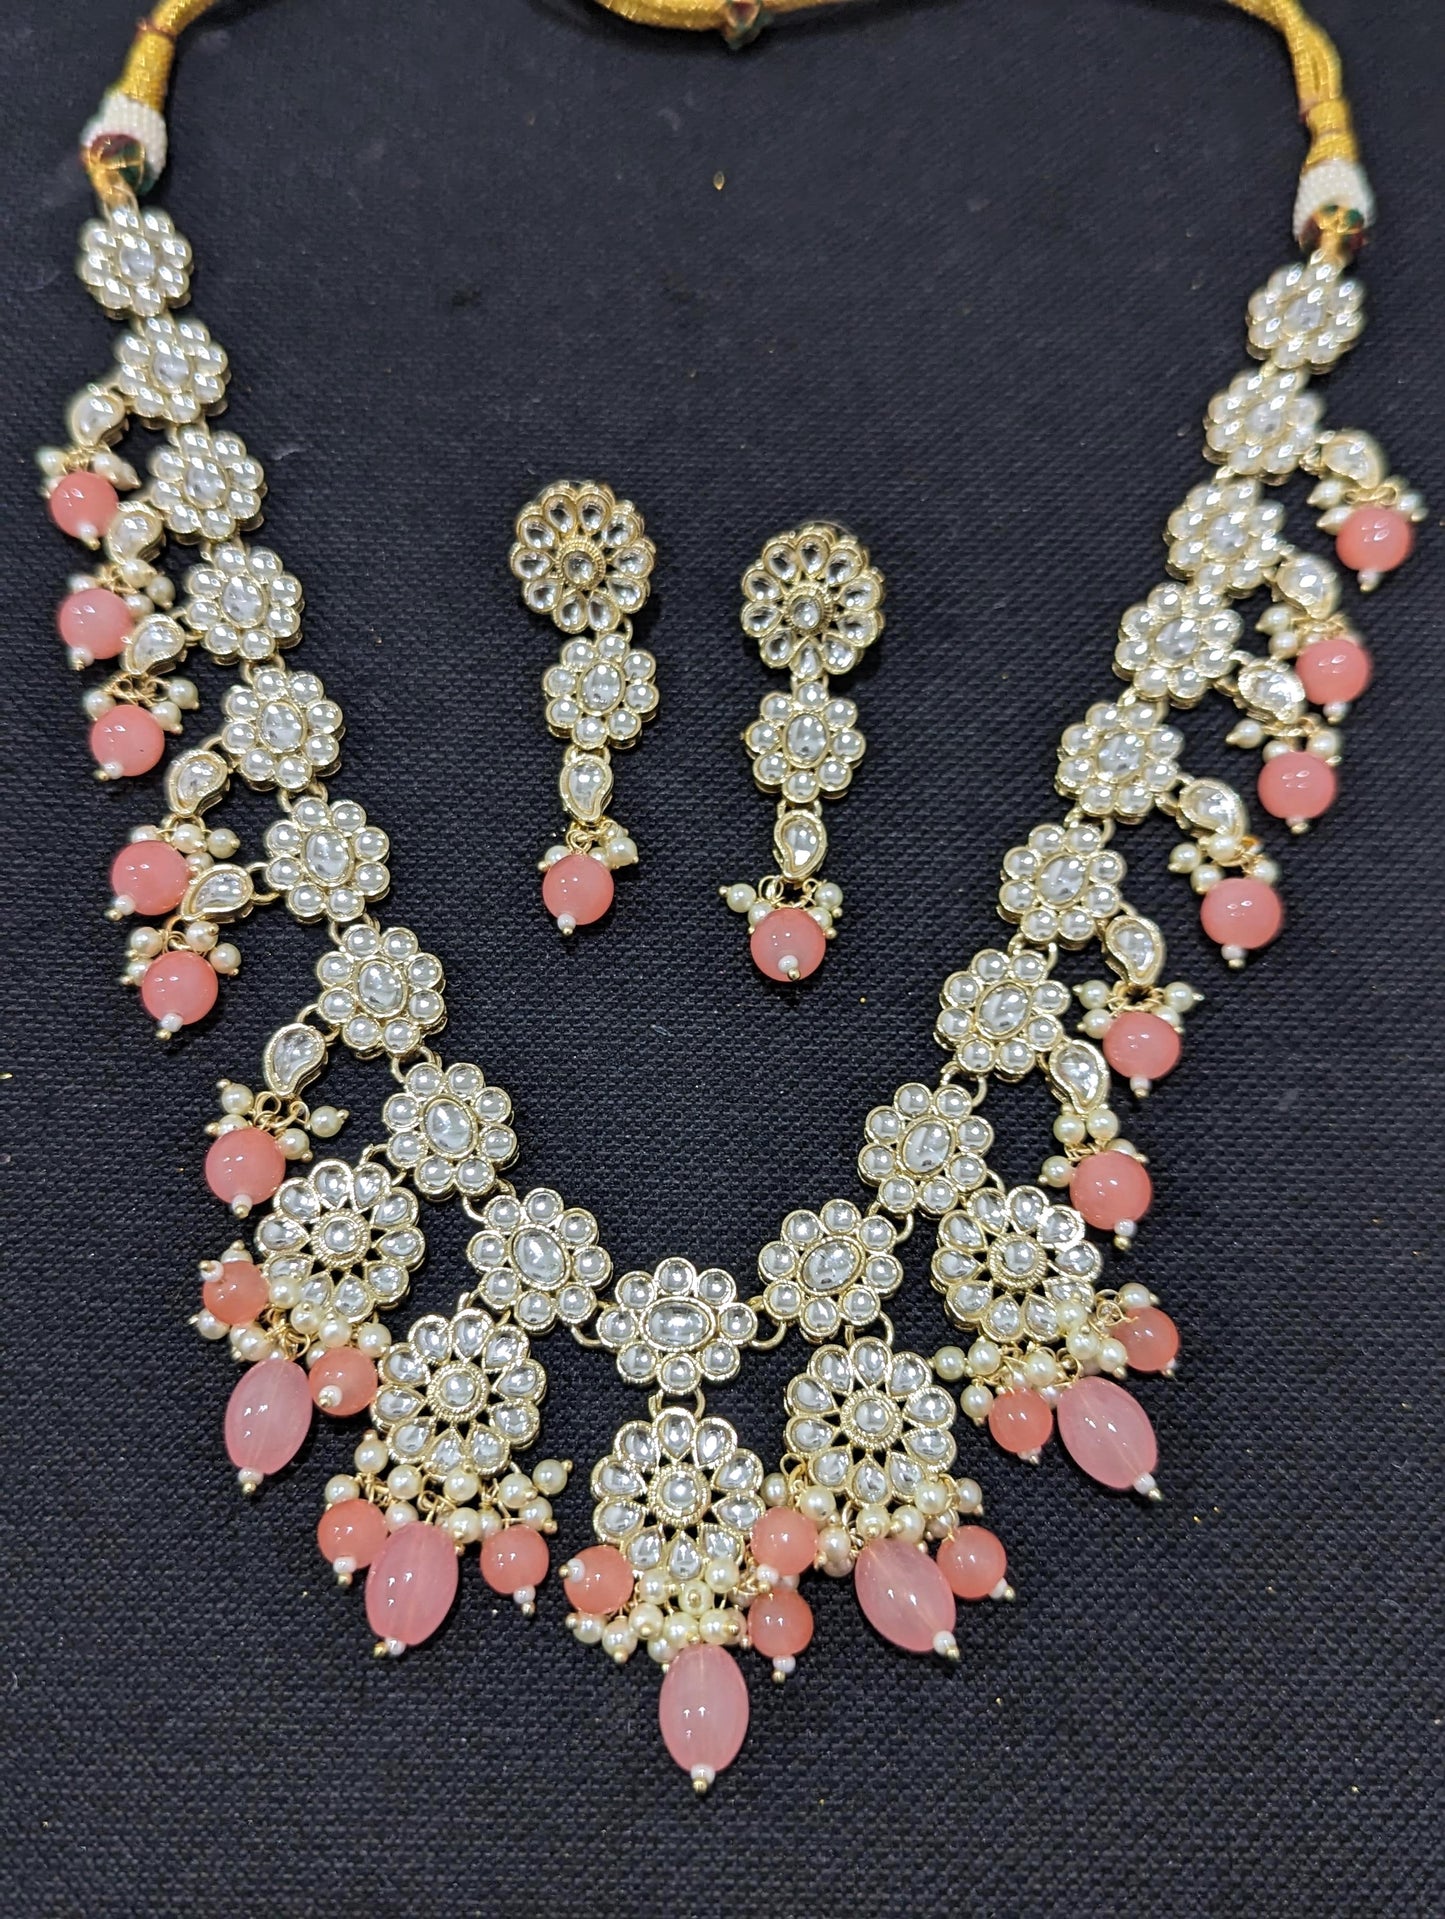 Colorful Kundan Necklace and Earrings set